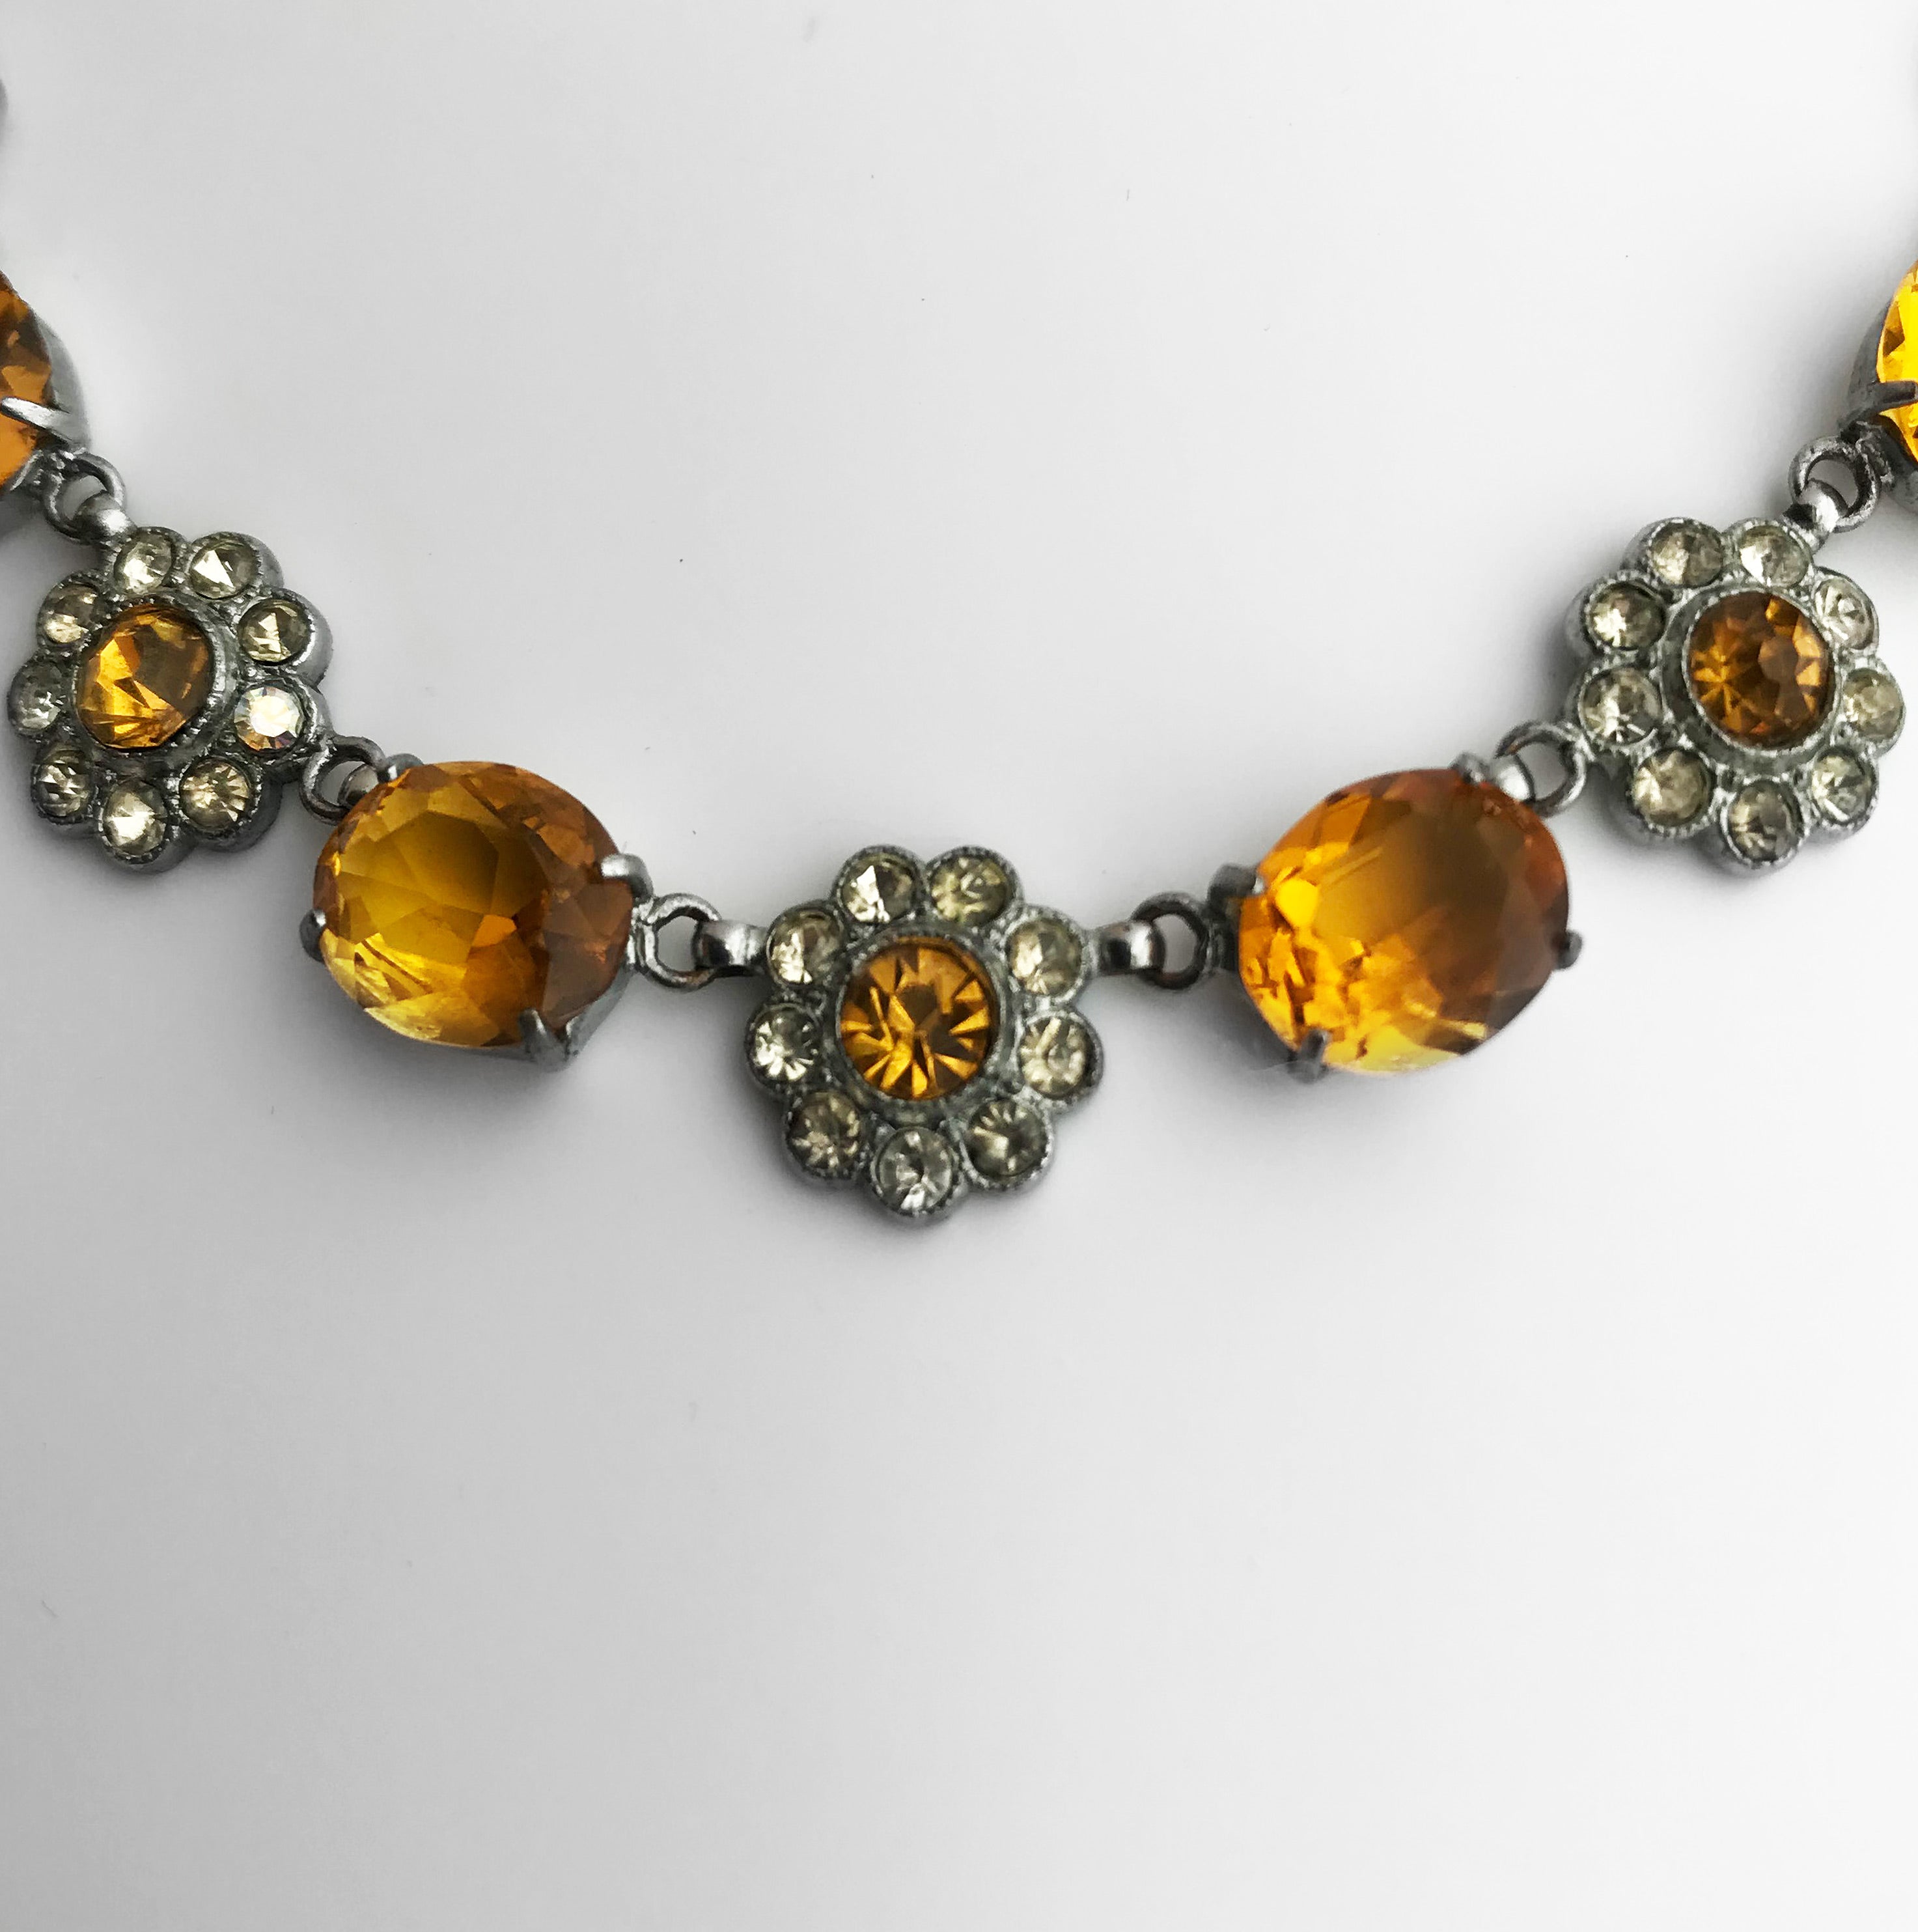 Vintage 1930's/1940's Citrine Glass Daisy Necklace - SHOP NOW - www.intovintage.co.uk